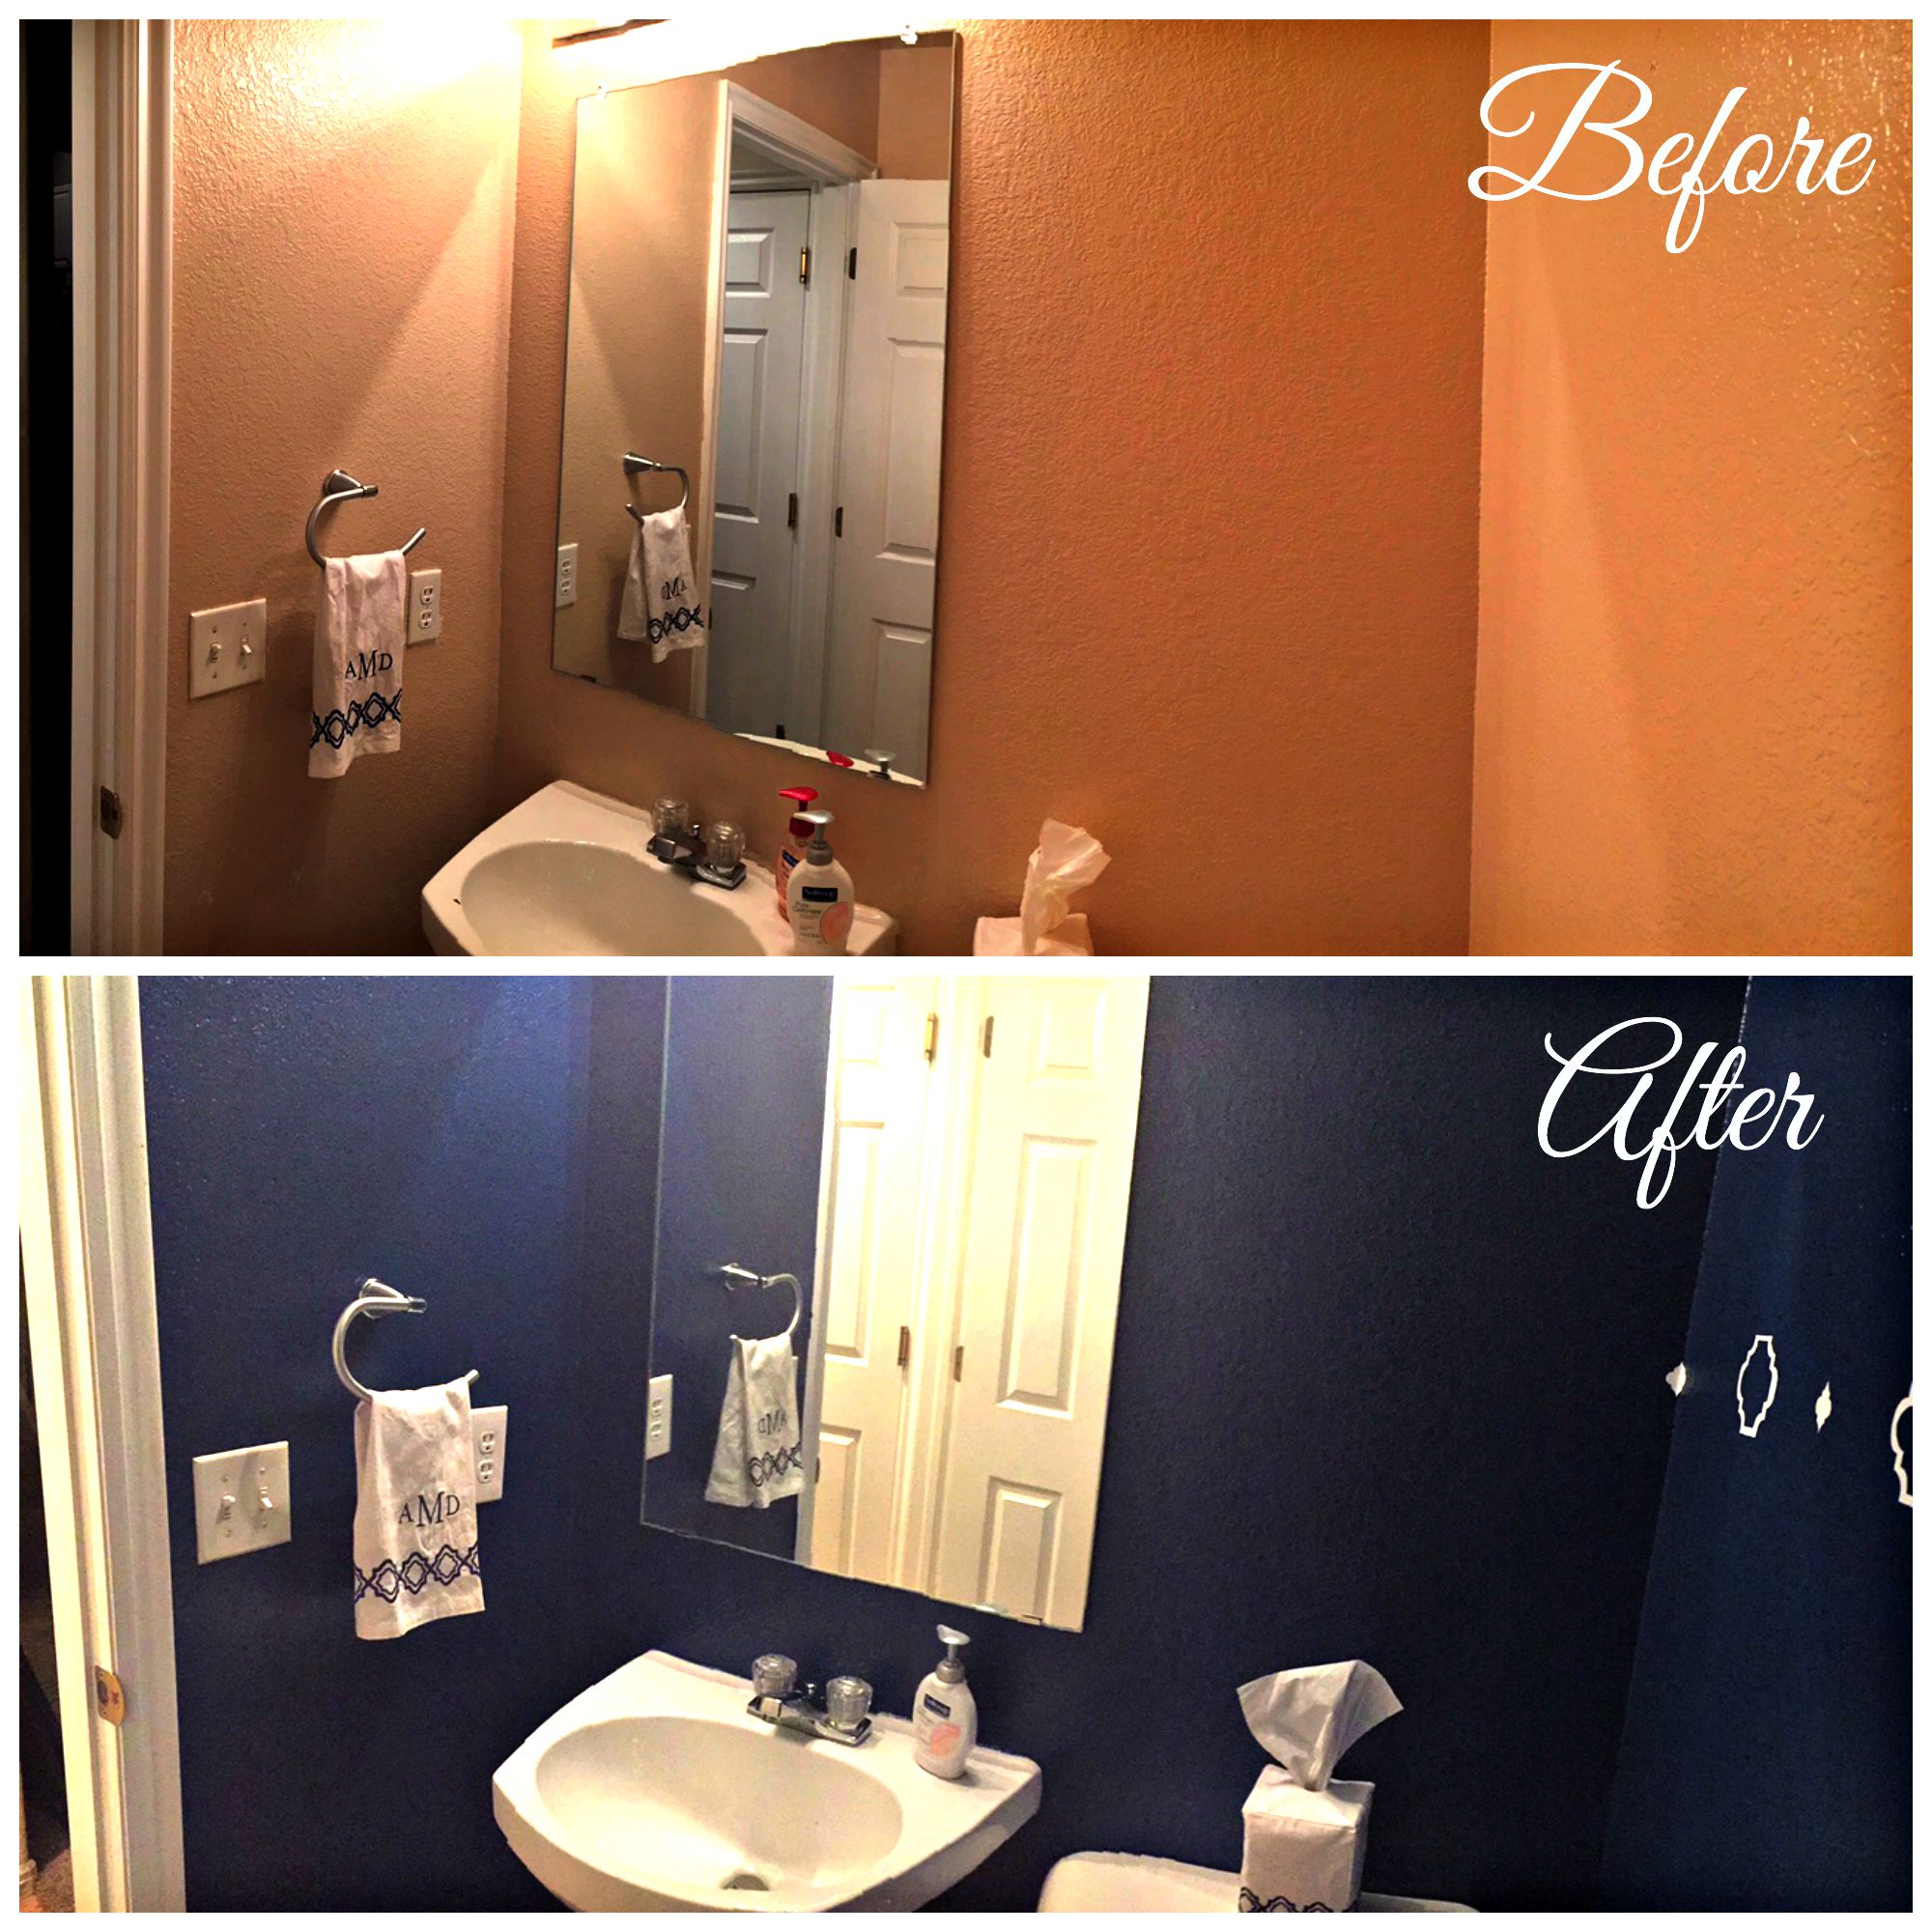 Before and after bathroom transformation